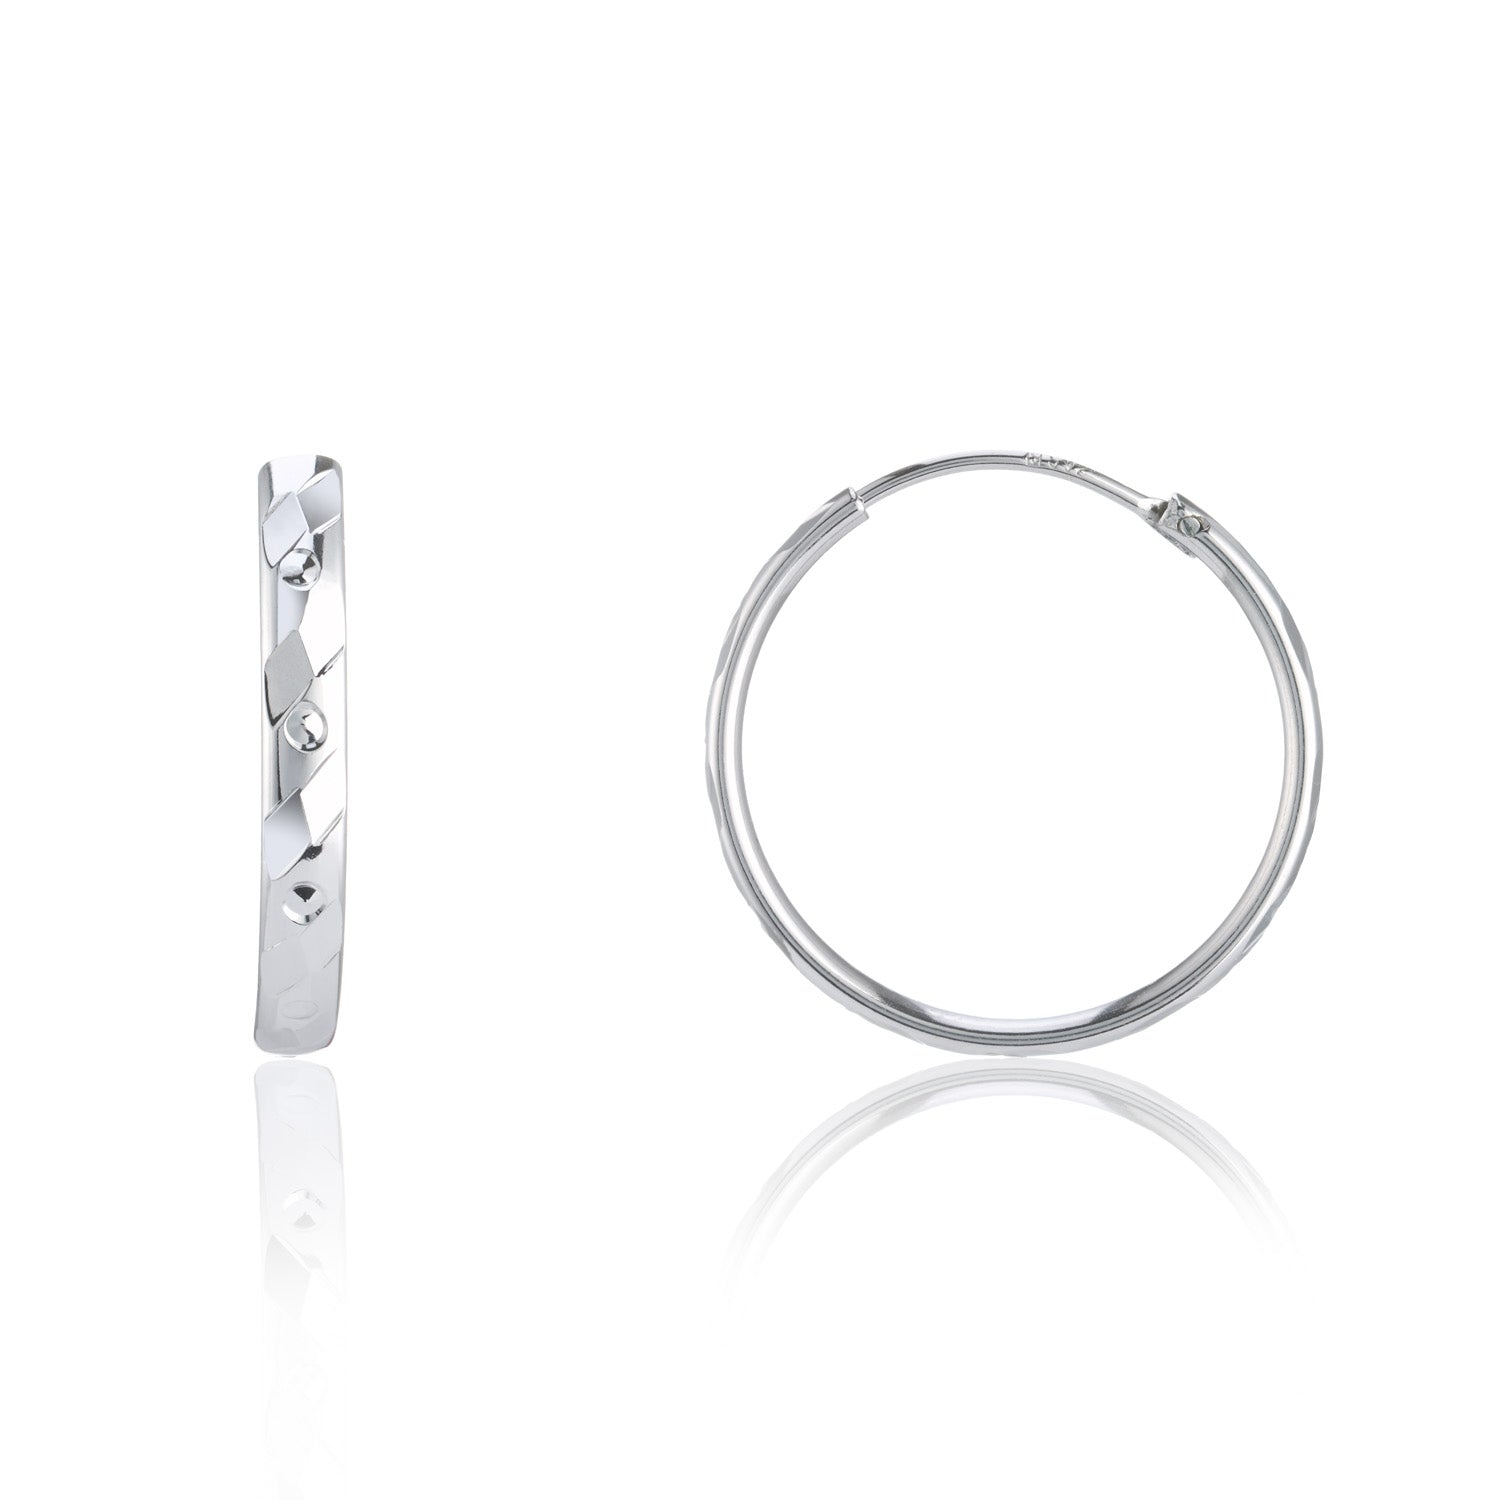 Polished style silver full hoop earring 20mm illusion stone set